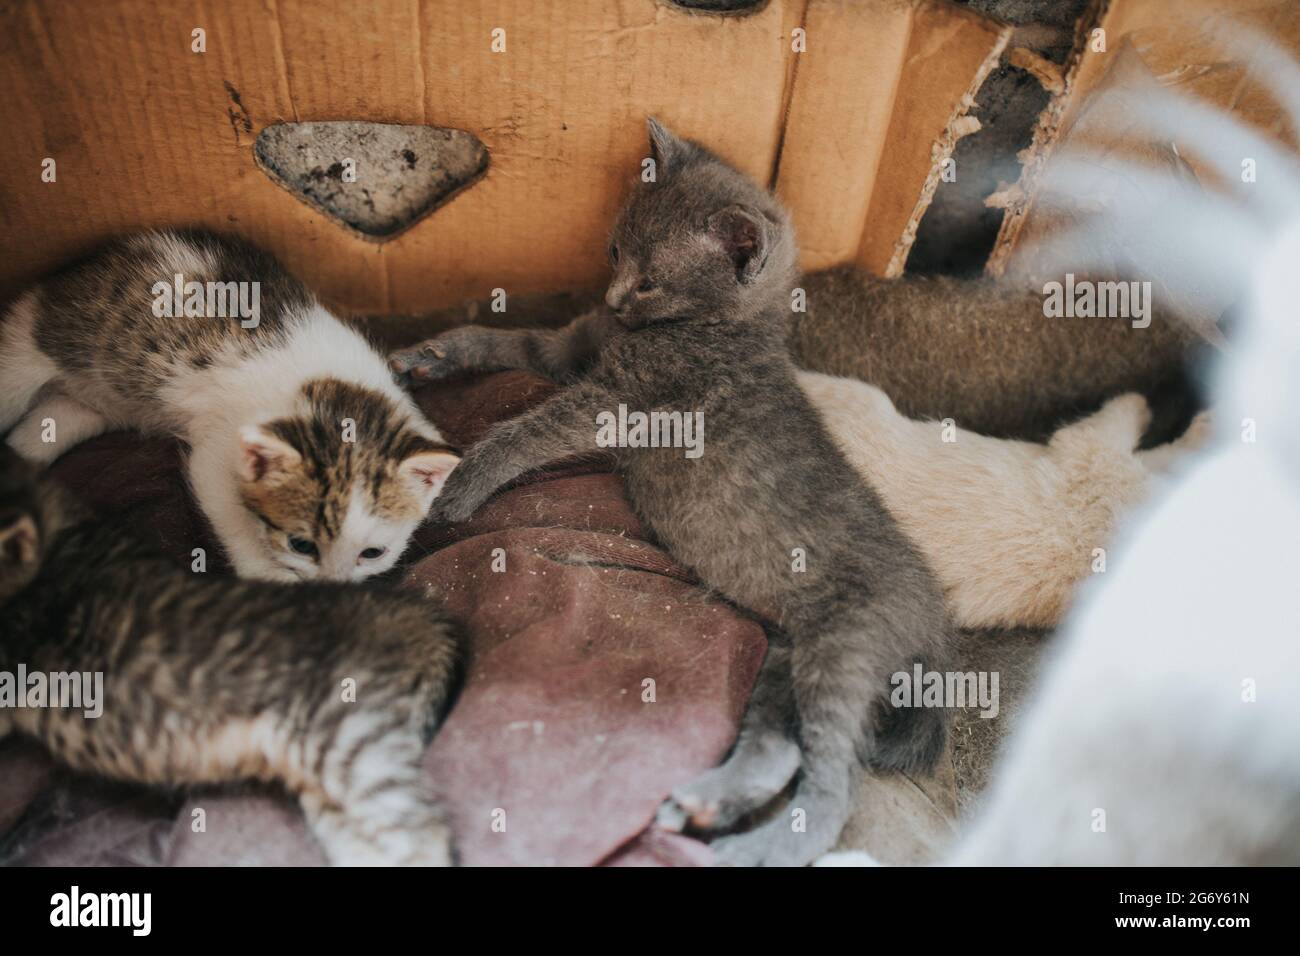 Closeup of the fluffy colorful adorable kittens on the blanket Stock Photo